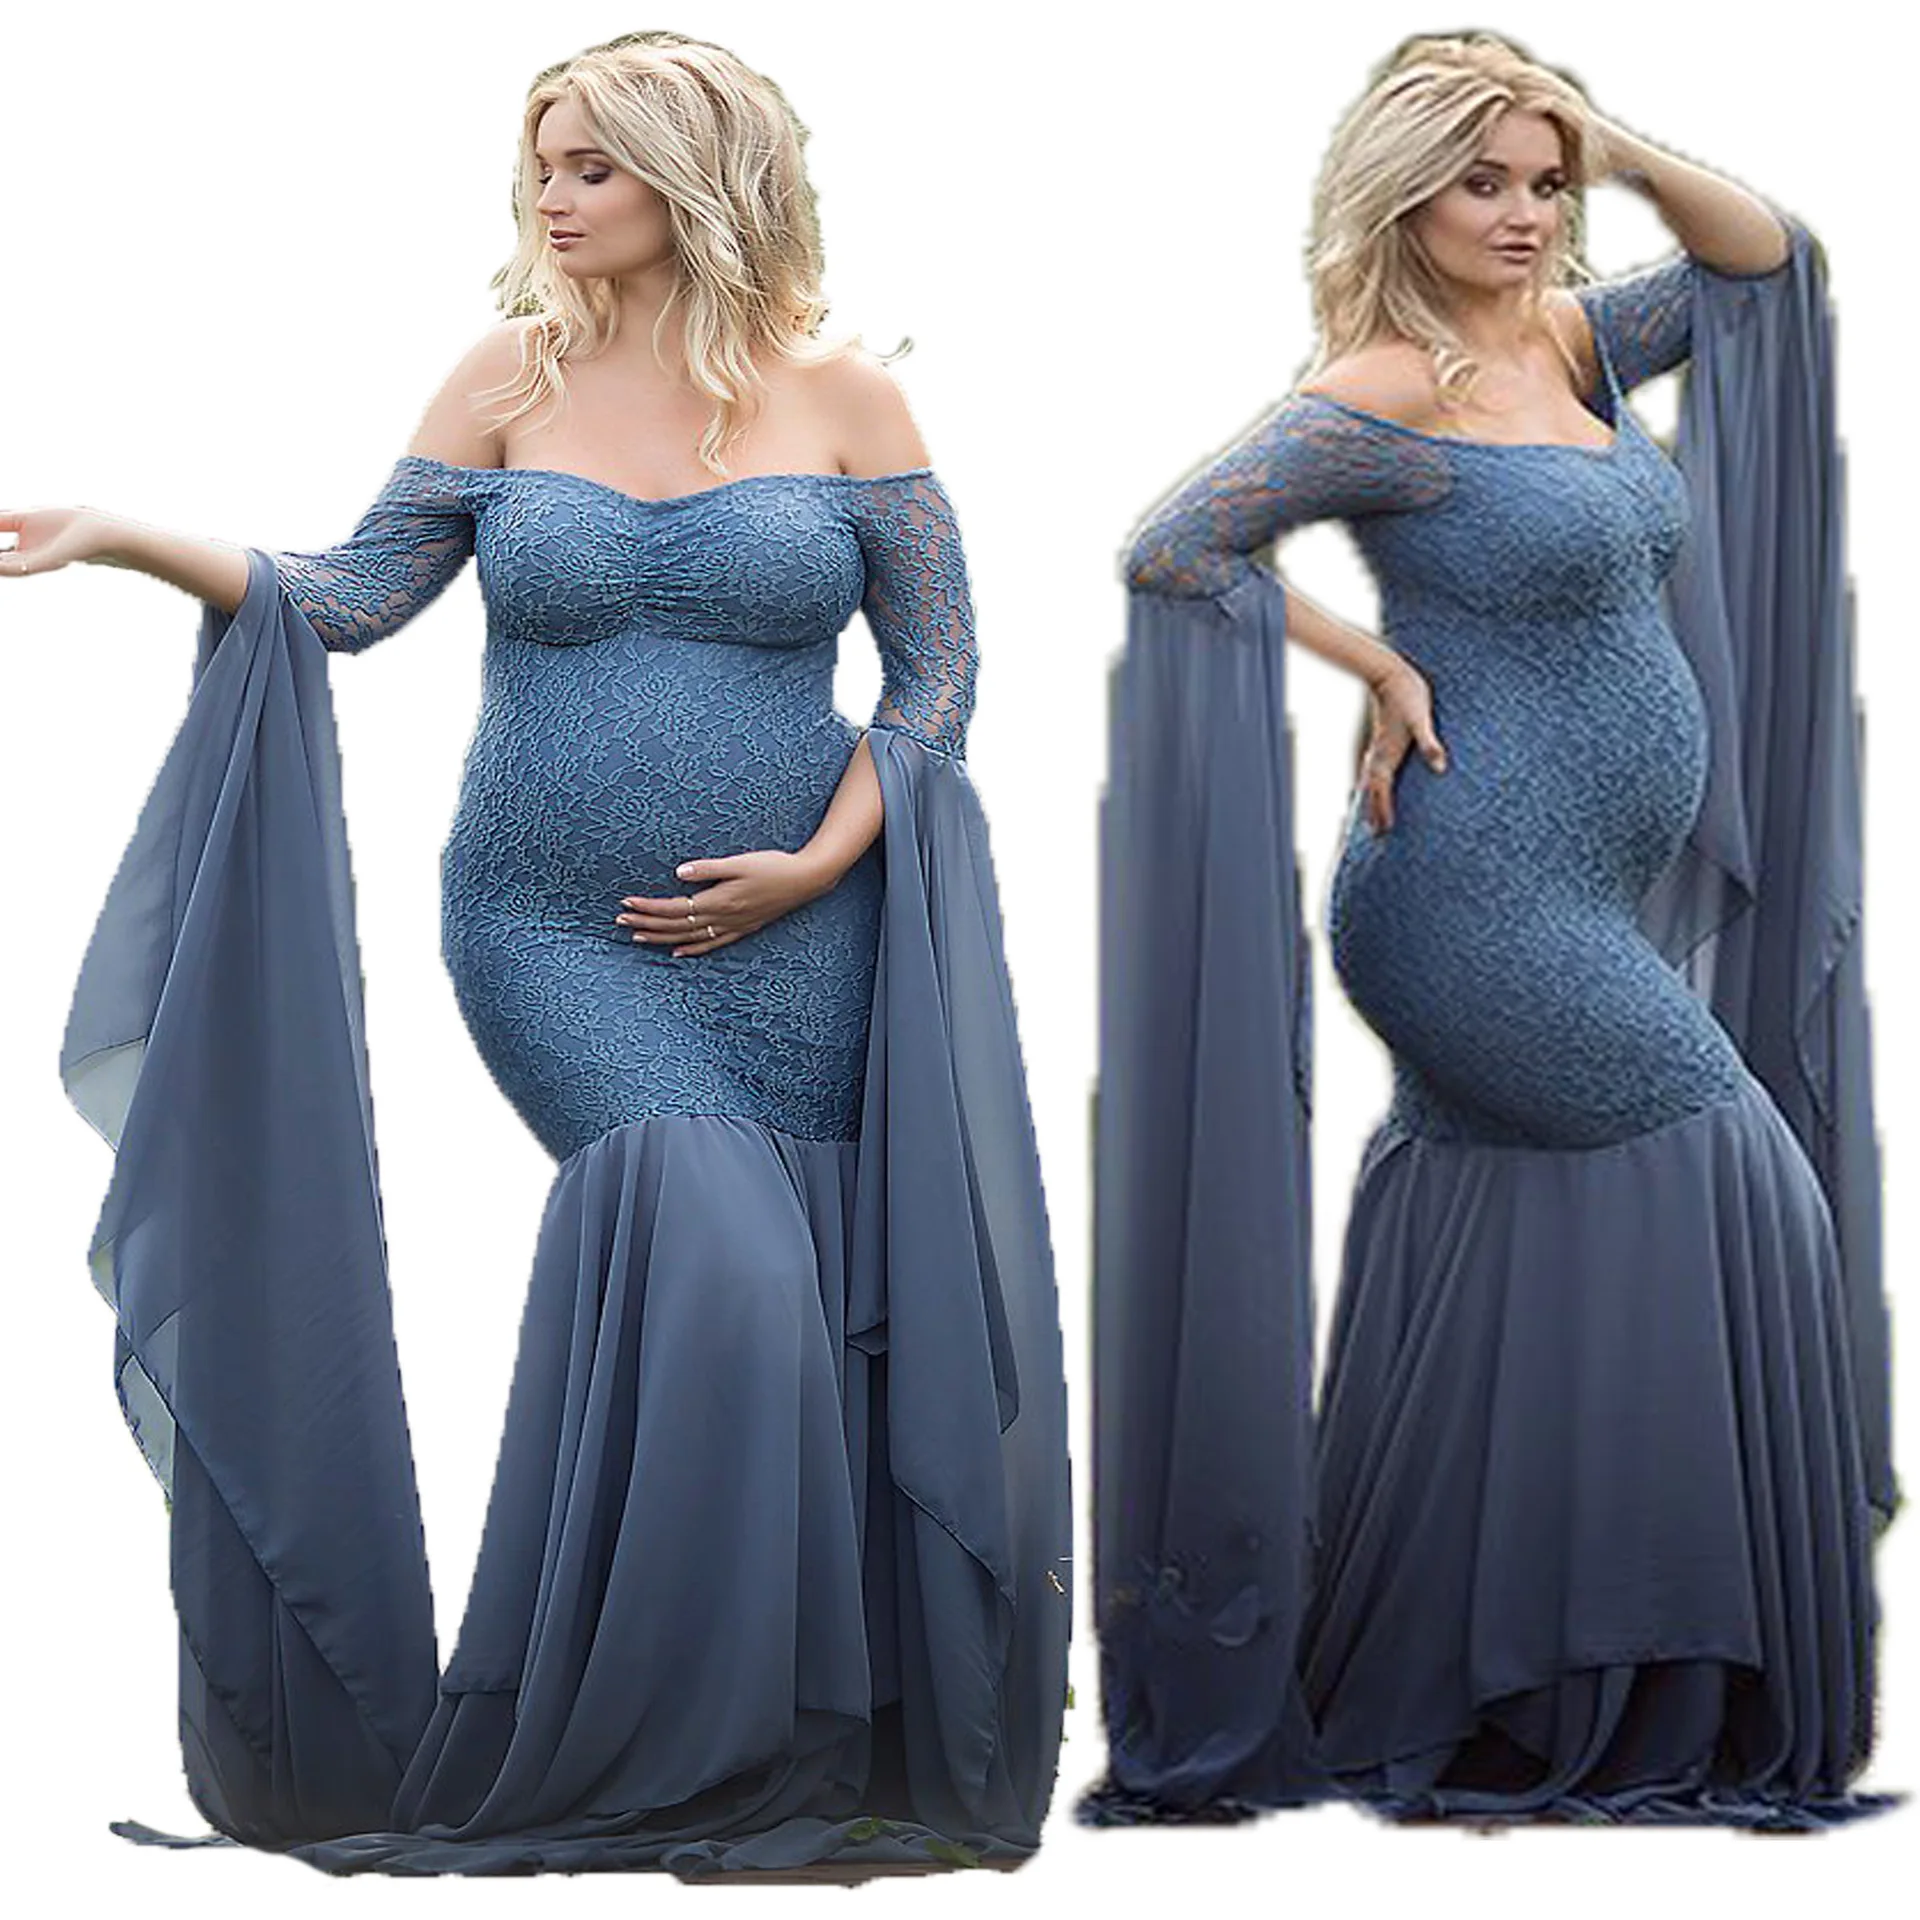 

Maternity Photography Dress Women's Lace Stitching Long-sleeved One-piece Dress Auxiliary Modeling Clothing Shooting Props